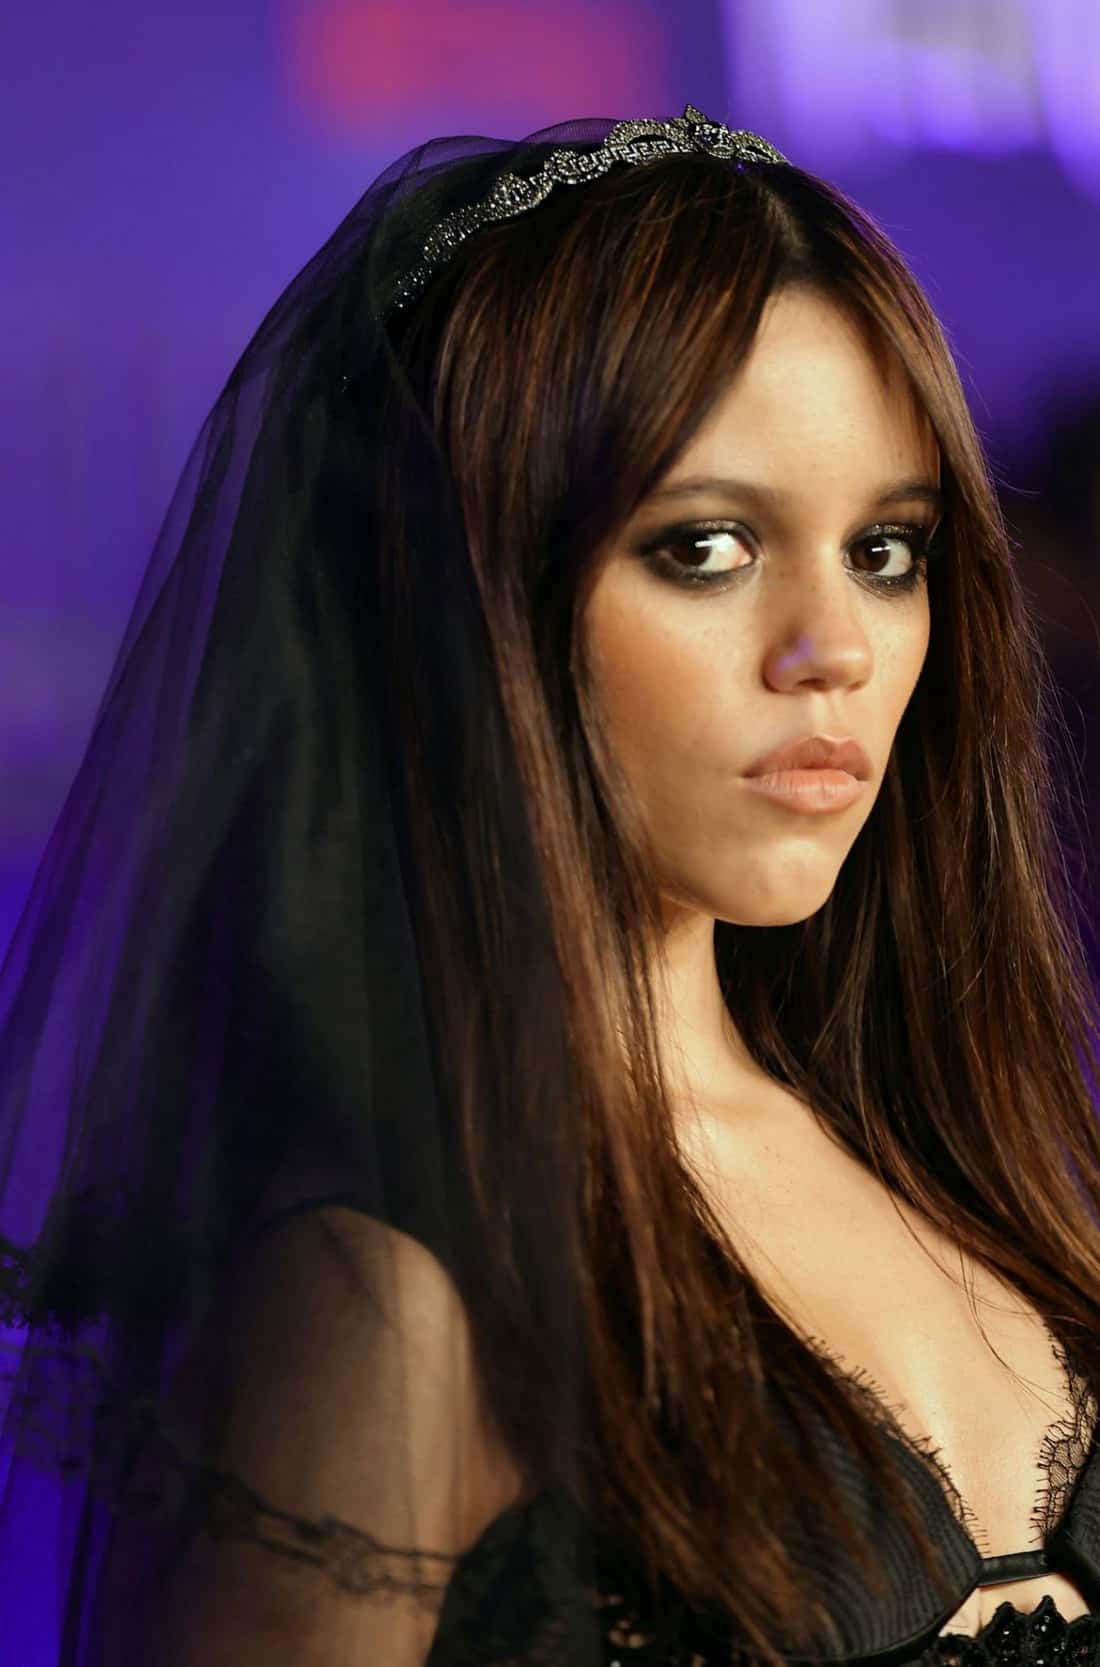 Jenna Ortega Makes a Statement on the Red Carpet with Her Gothic Bride Look